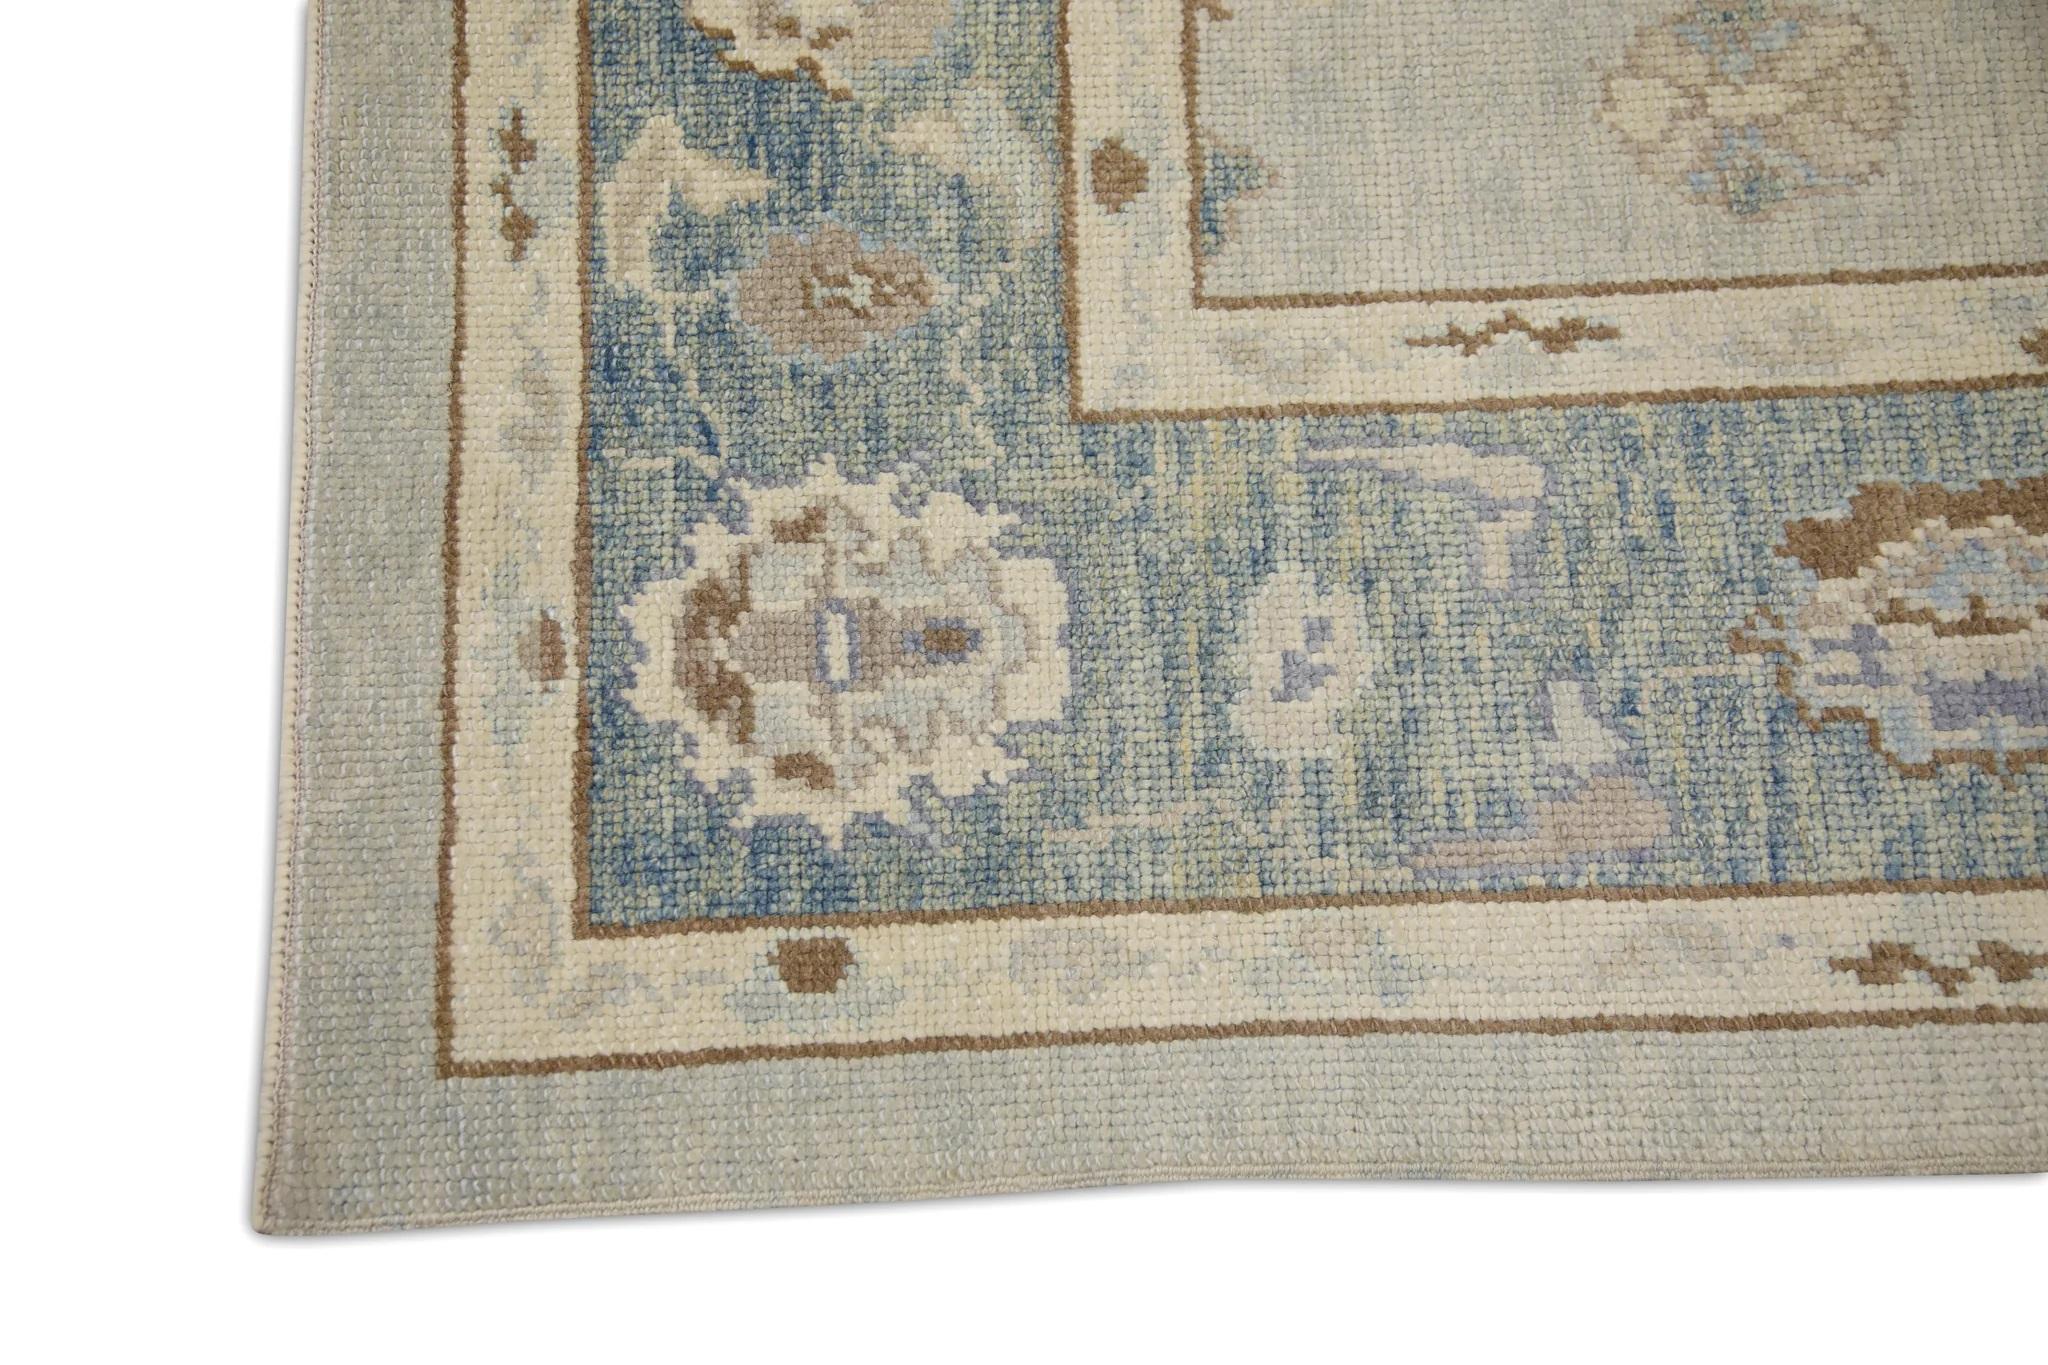 Vegetable Dyed Blue and Brown Handwoven Wool Turkish Oushak Rug in Floral Pattern 6' x 9'1